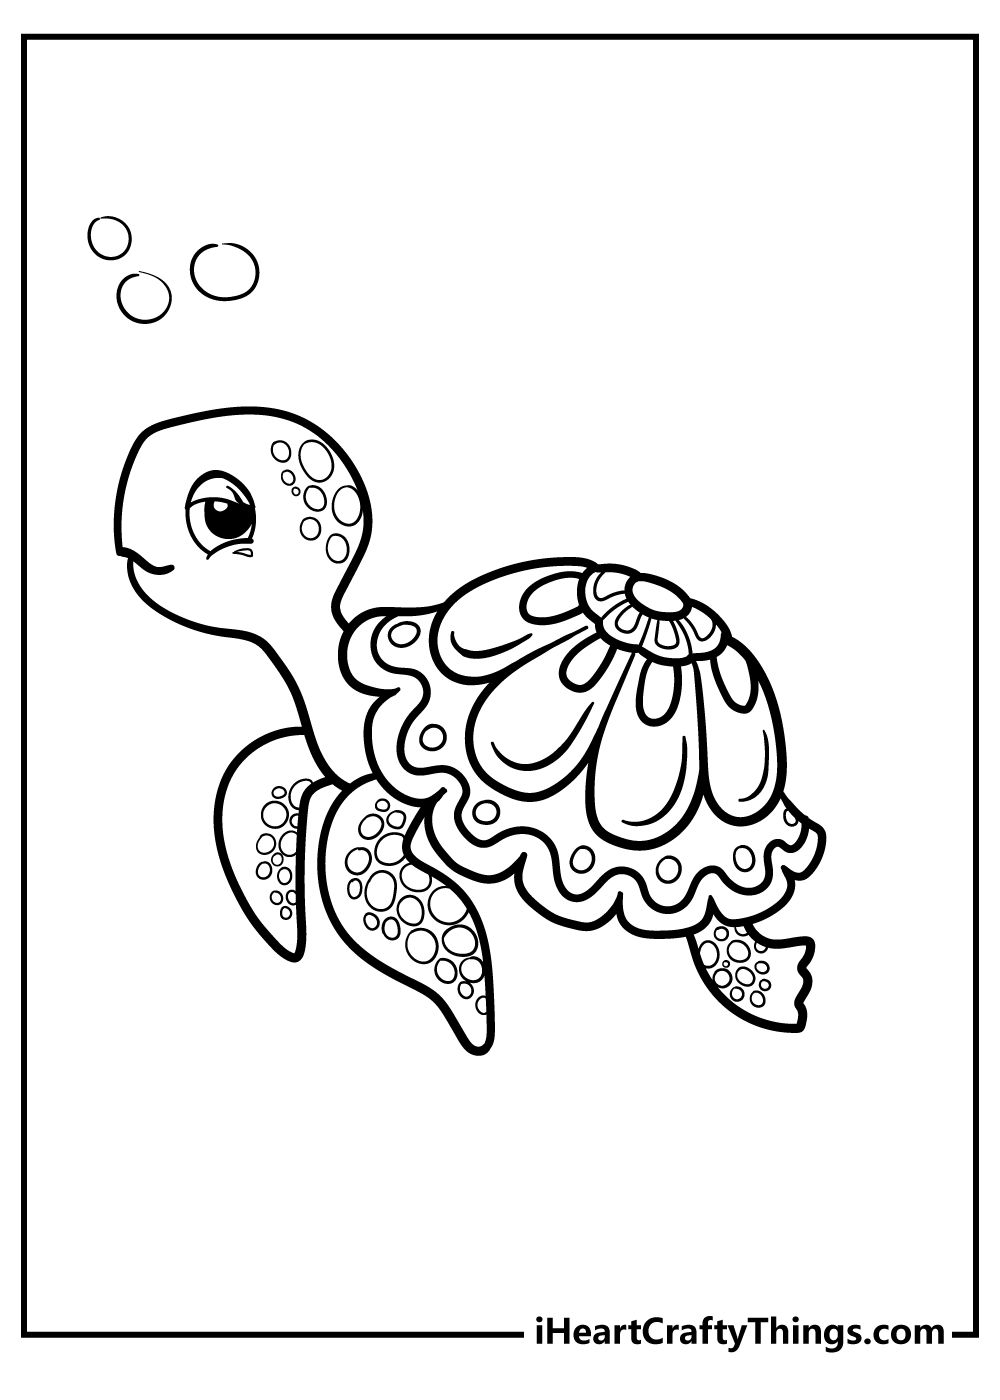 Sea Animals Coloring Pages free download